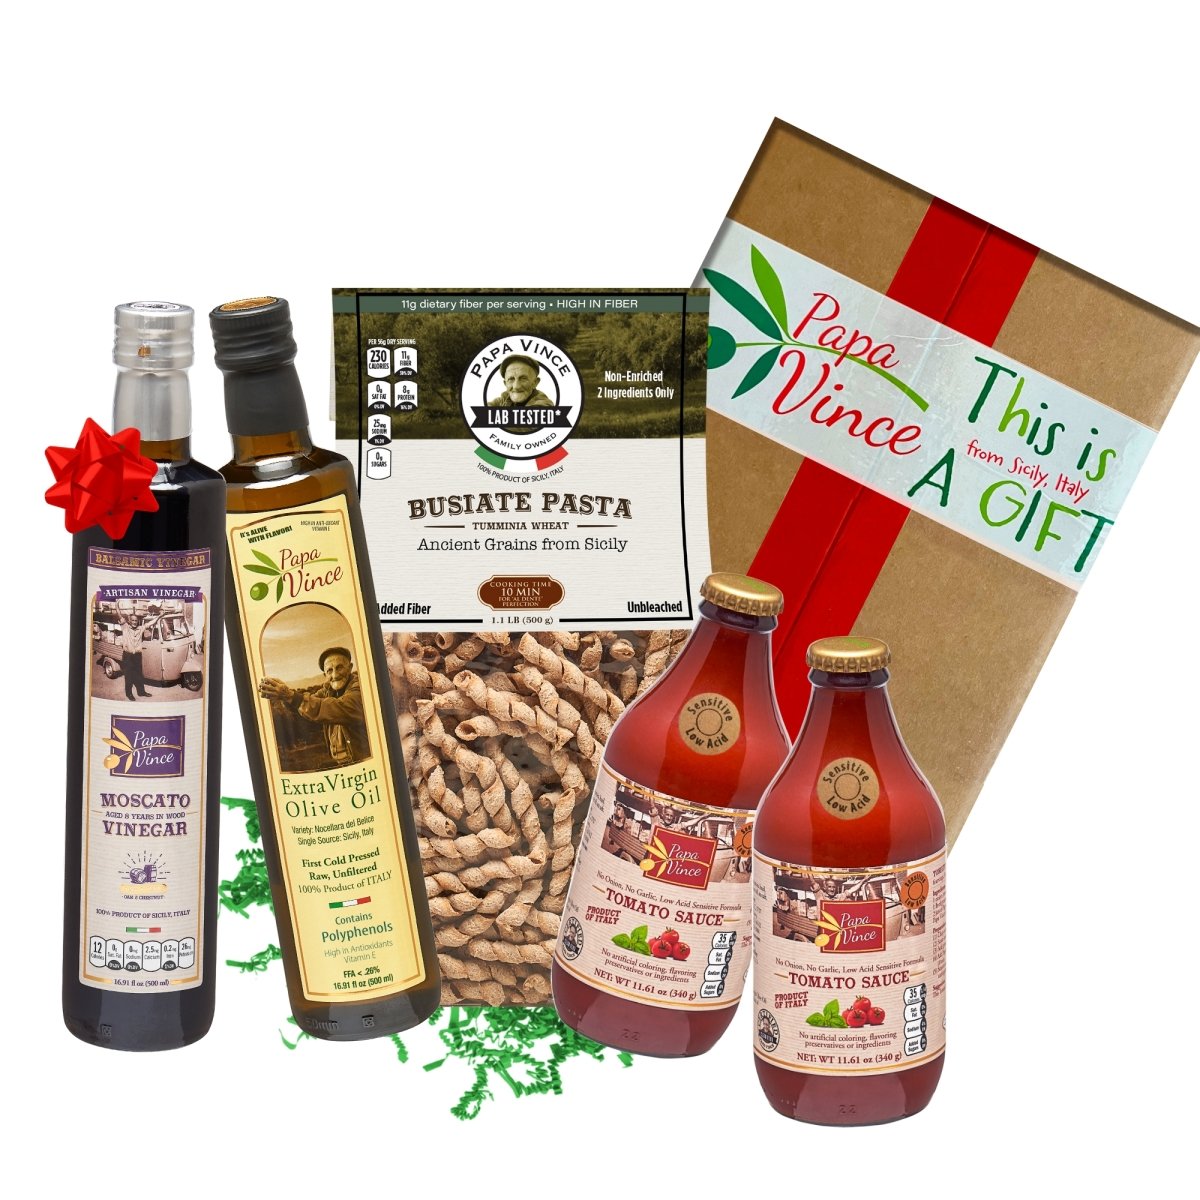 Gourmet Clean Food Basket from Sicily Gift - Farm Fresh Items from Italy | Extra Virgin Olive Oil, Moscato Balsamic Vinegar, Busiate Tumminia Pasta, Cherry Tomato Sauce | Papa Vince - Papa Vince